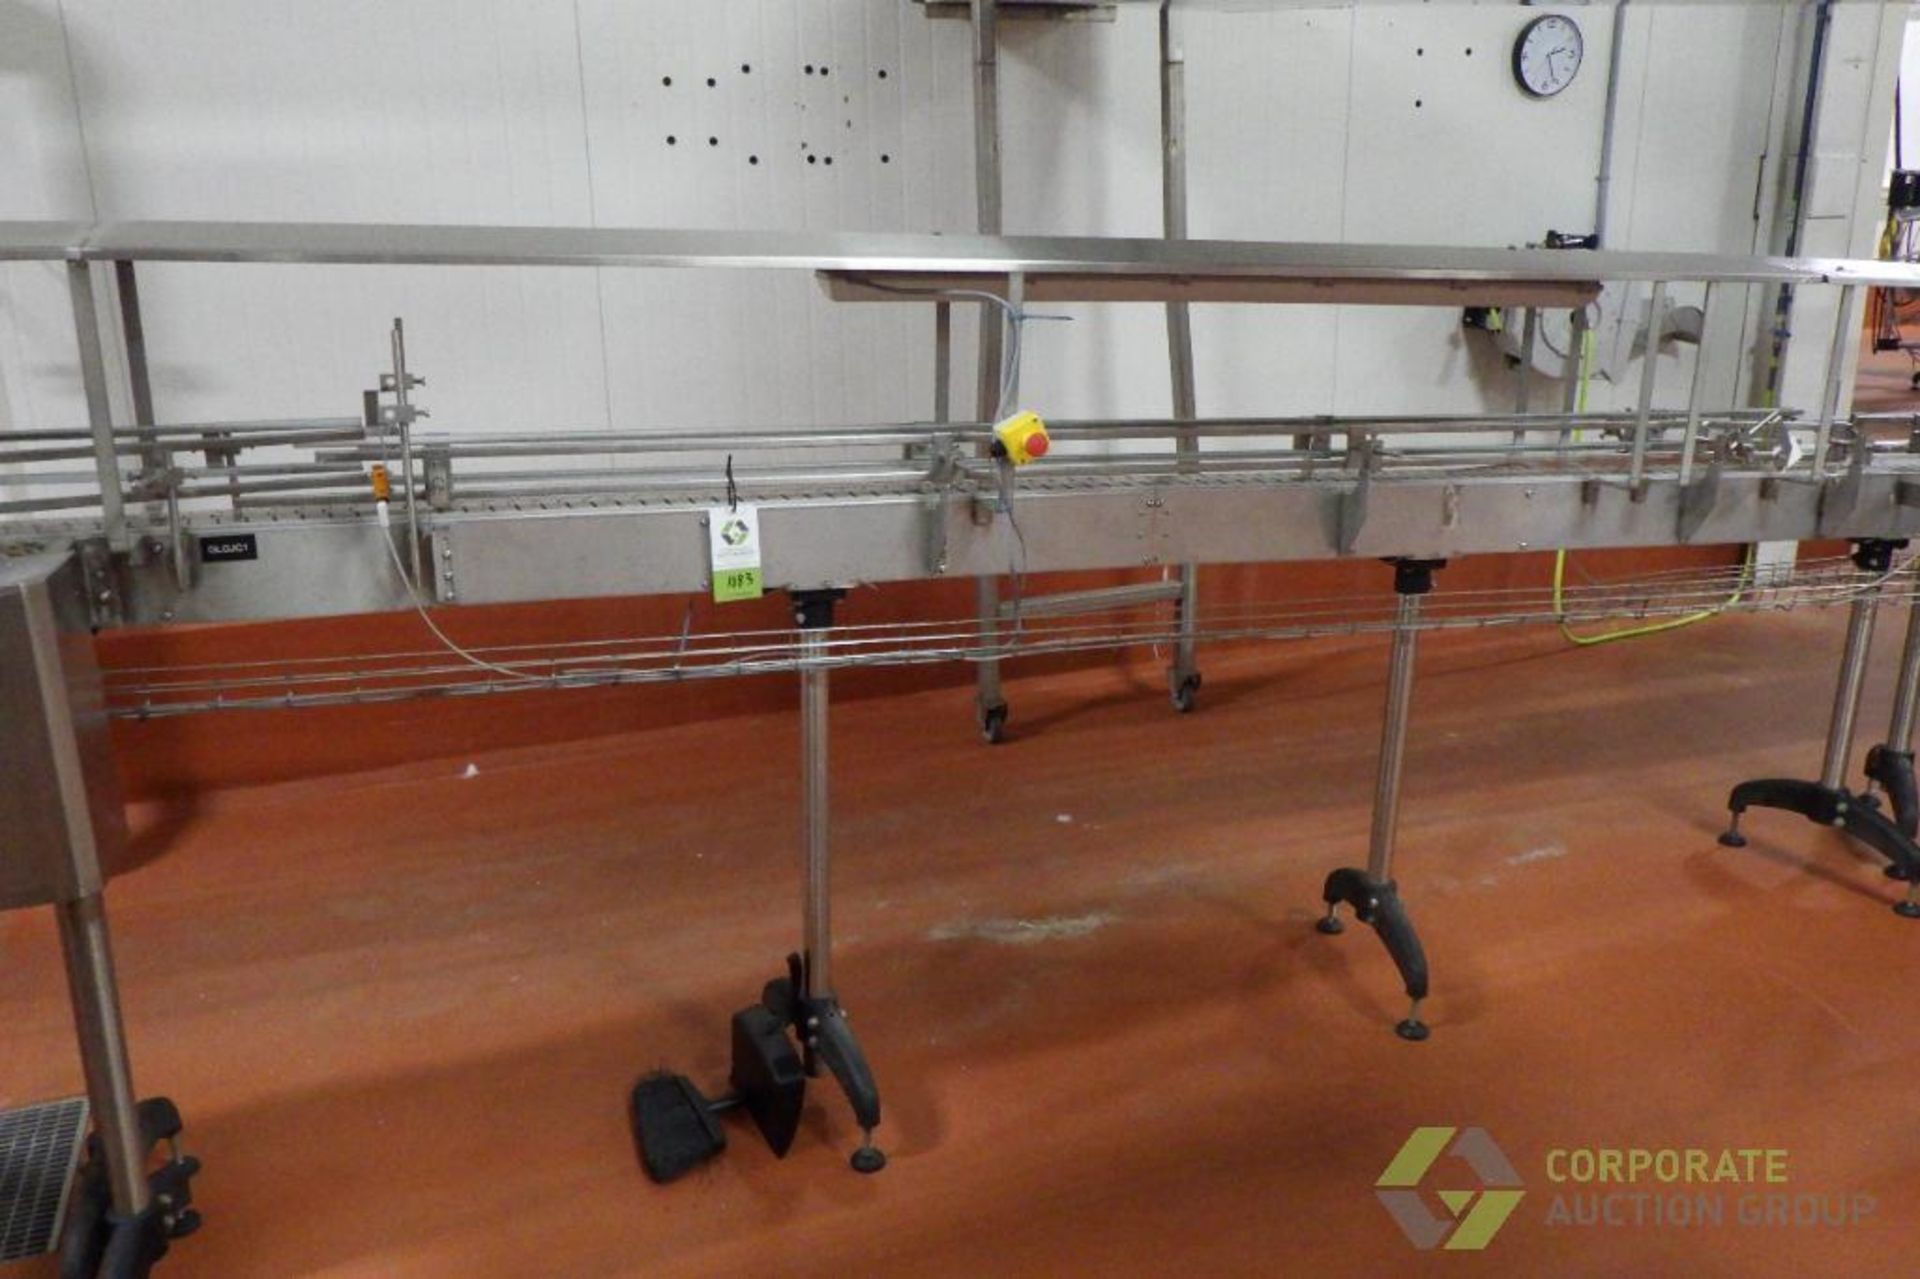 SS Bottling Conveyor, 45' x 4.5" x adj. H, with rails, overhead cover, wire guards, (3) 90d turns